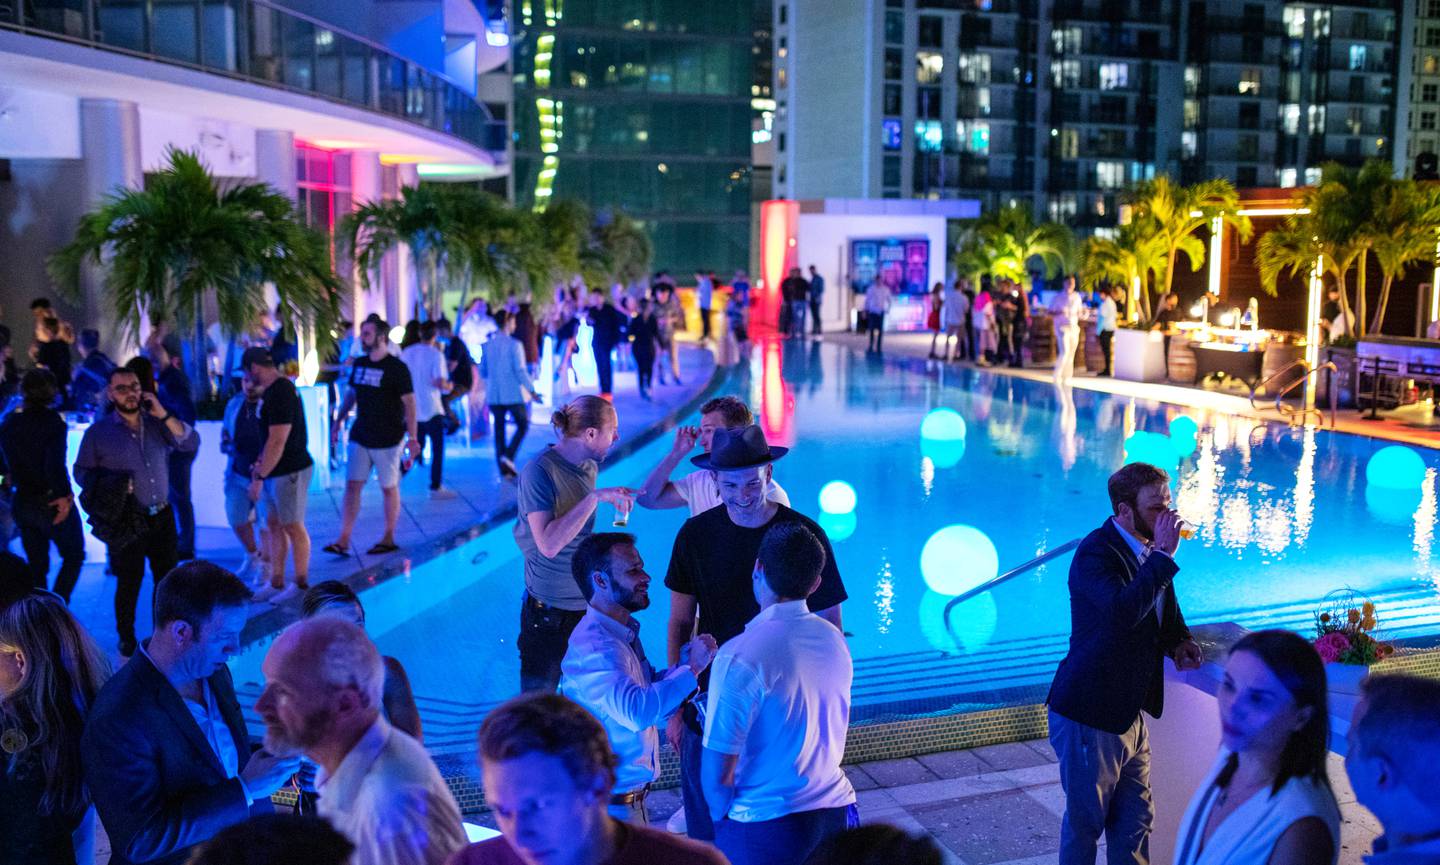 Guests talk around a pool at a swanky venue in Miami.